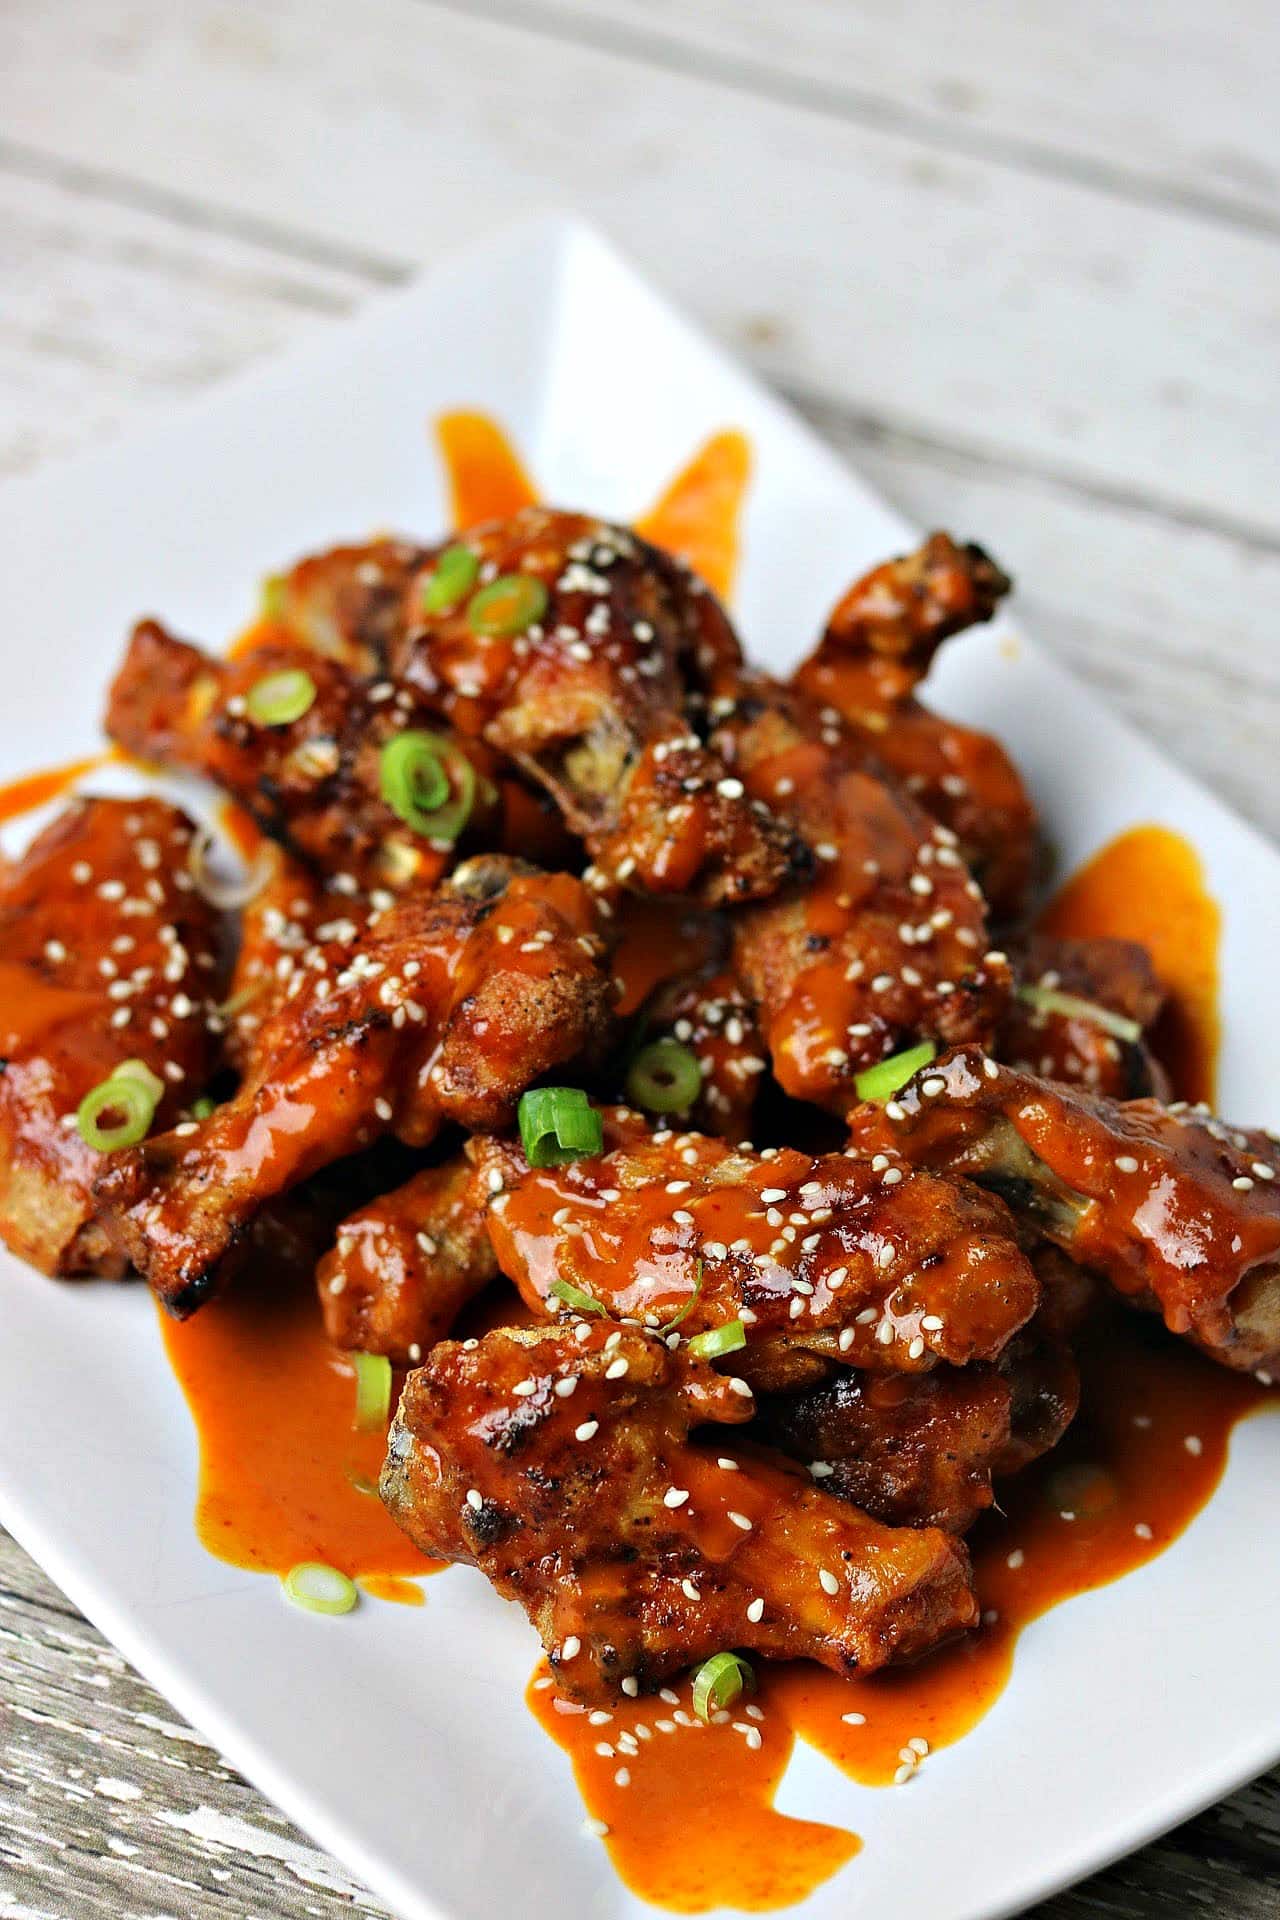 Keto Thai Red Curry Chicken Wings, topped with sesame seeds and green onions, on a white serving dish.